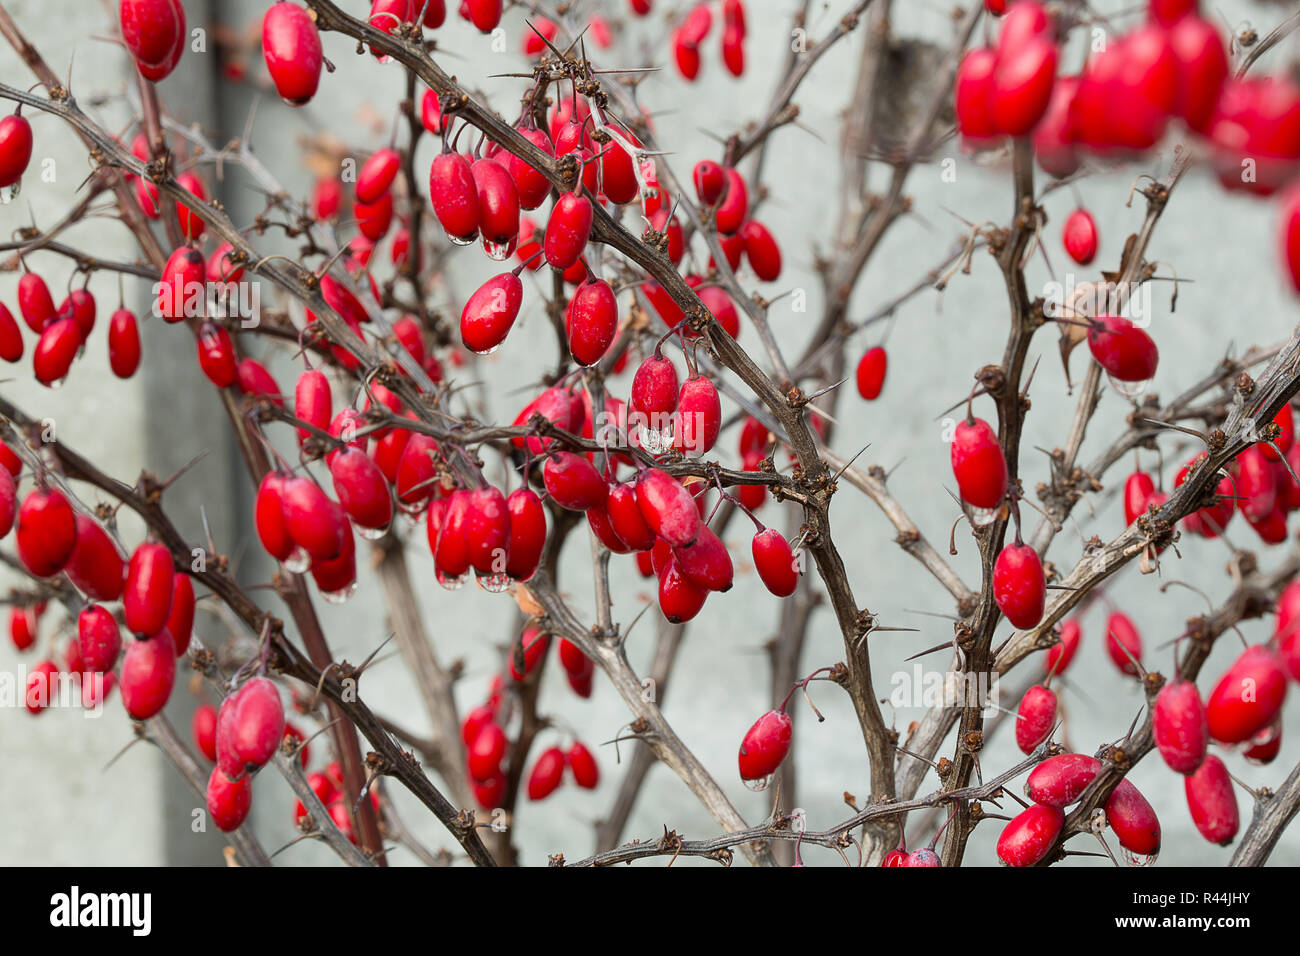 Winter Berberis Thunbergii also called American Barberry or Berberis canadensis red berries with water drops background. Berberis fruits on branches. Stock Photo